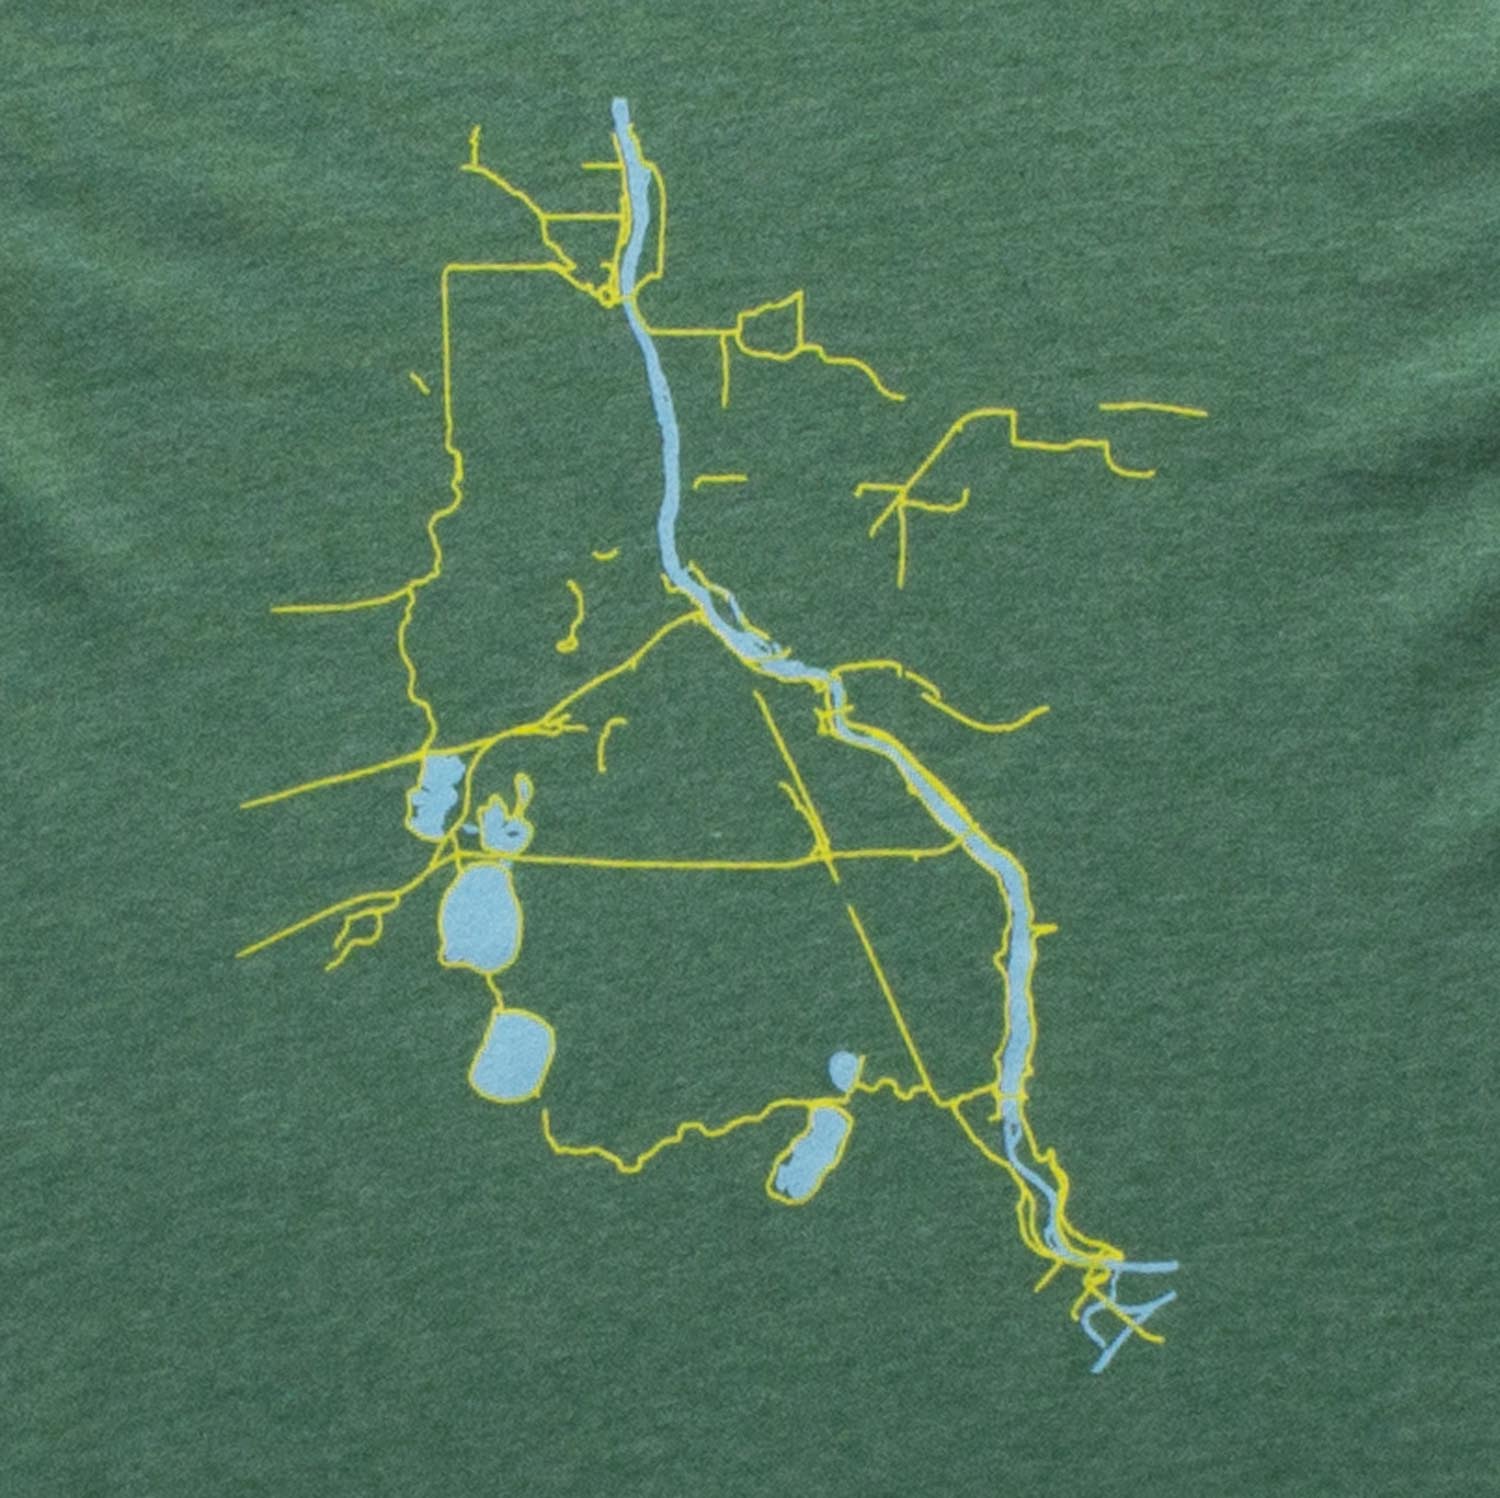 Details of green t-shirt with Minneapolis bike trails in yellow and lakes & rivers in blue, bike trails, biking, minnesota, twin cities, minneapolis, st paul, minnesota-themed clothing, clothing, apparel, accessories, gifts, goods, t-shirt, t shirt, tee, t-shirts, t shirts, tees